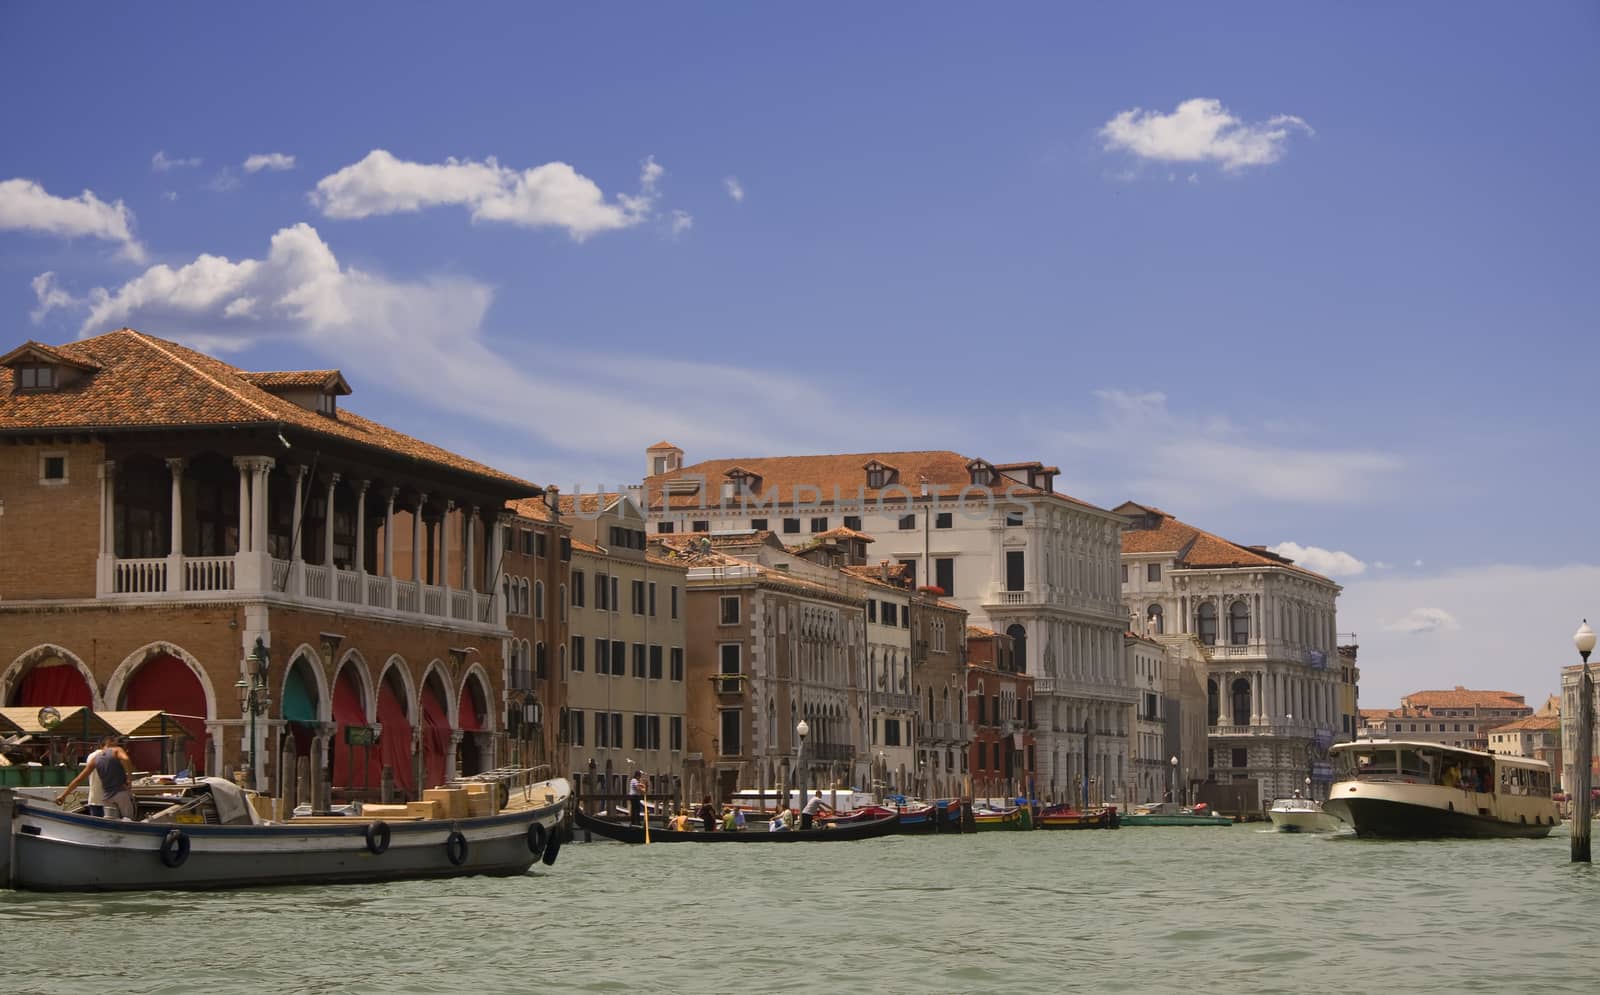 Grand canal view in Venice, Italy